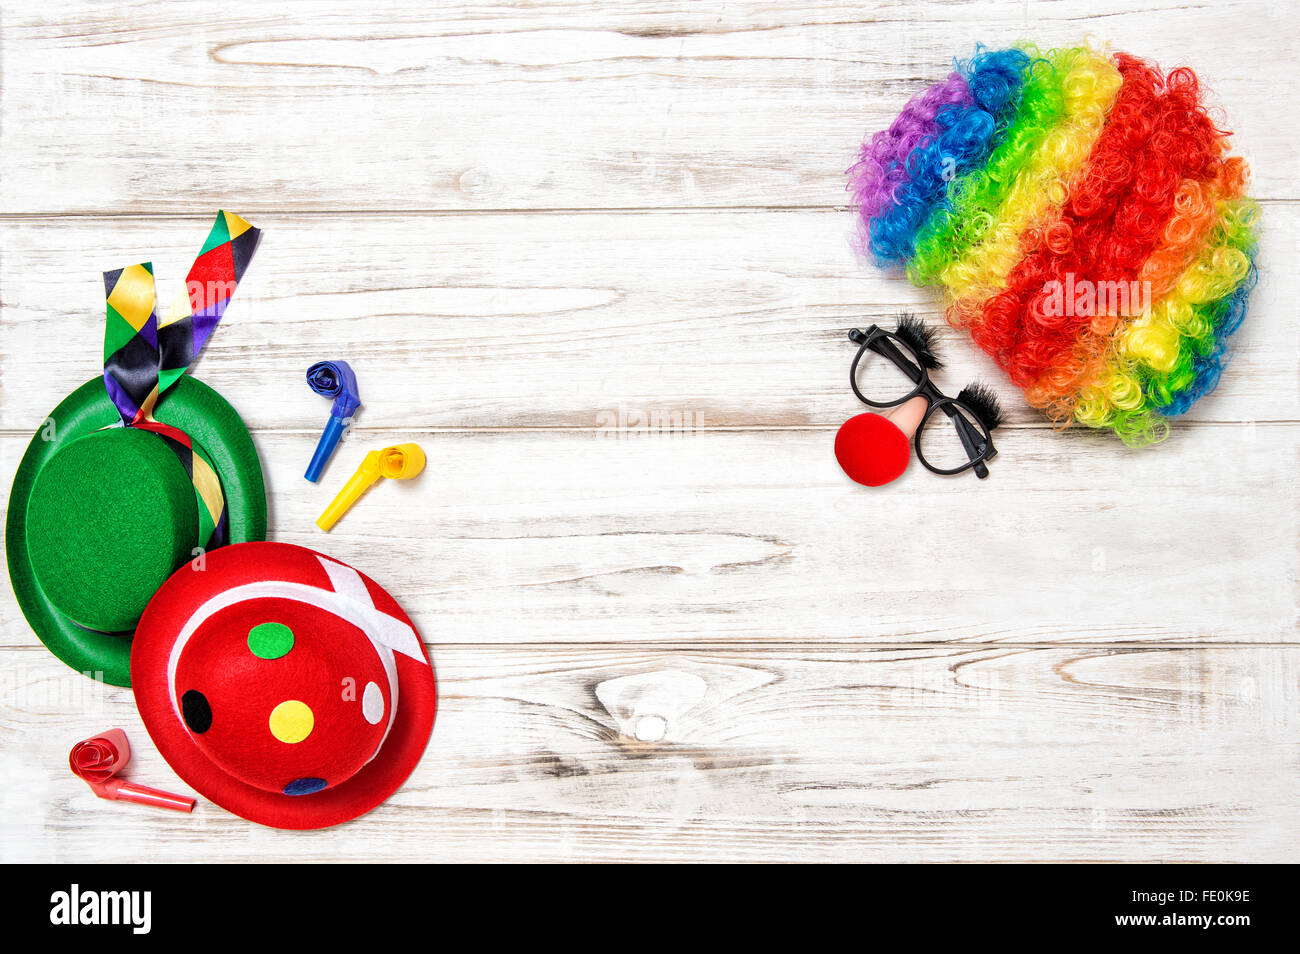 Carnival mask clown with wig. Holidays background Stock Photo